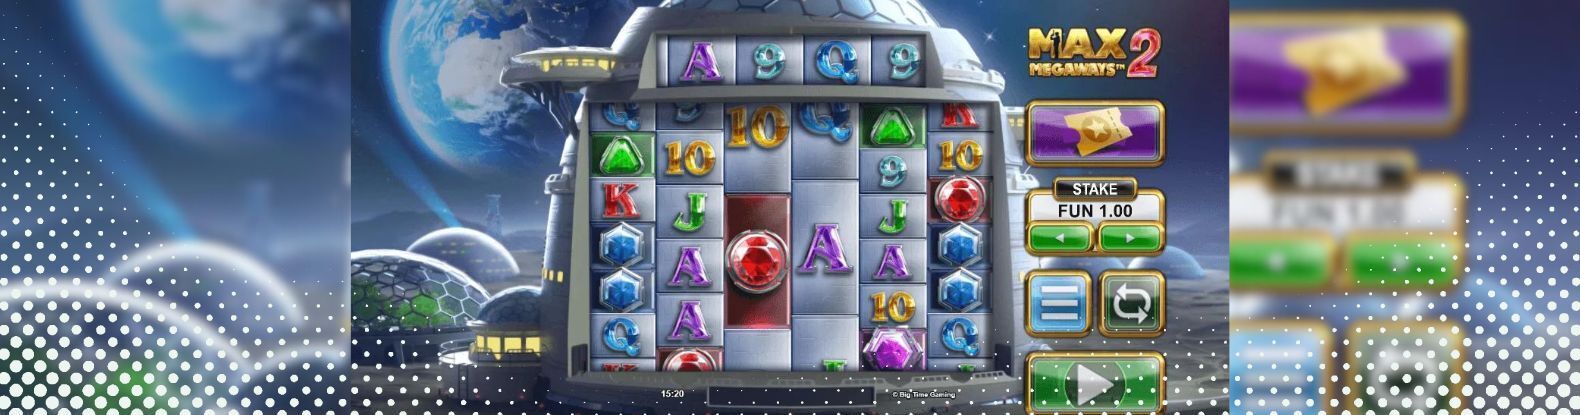 This is a screenshot of Max Megaways 2 Pokies Game by Big Time Gaming